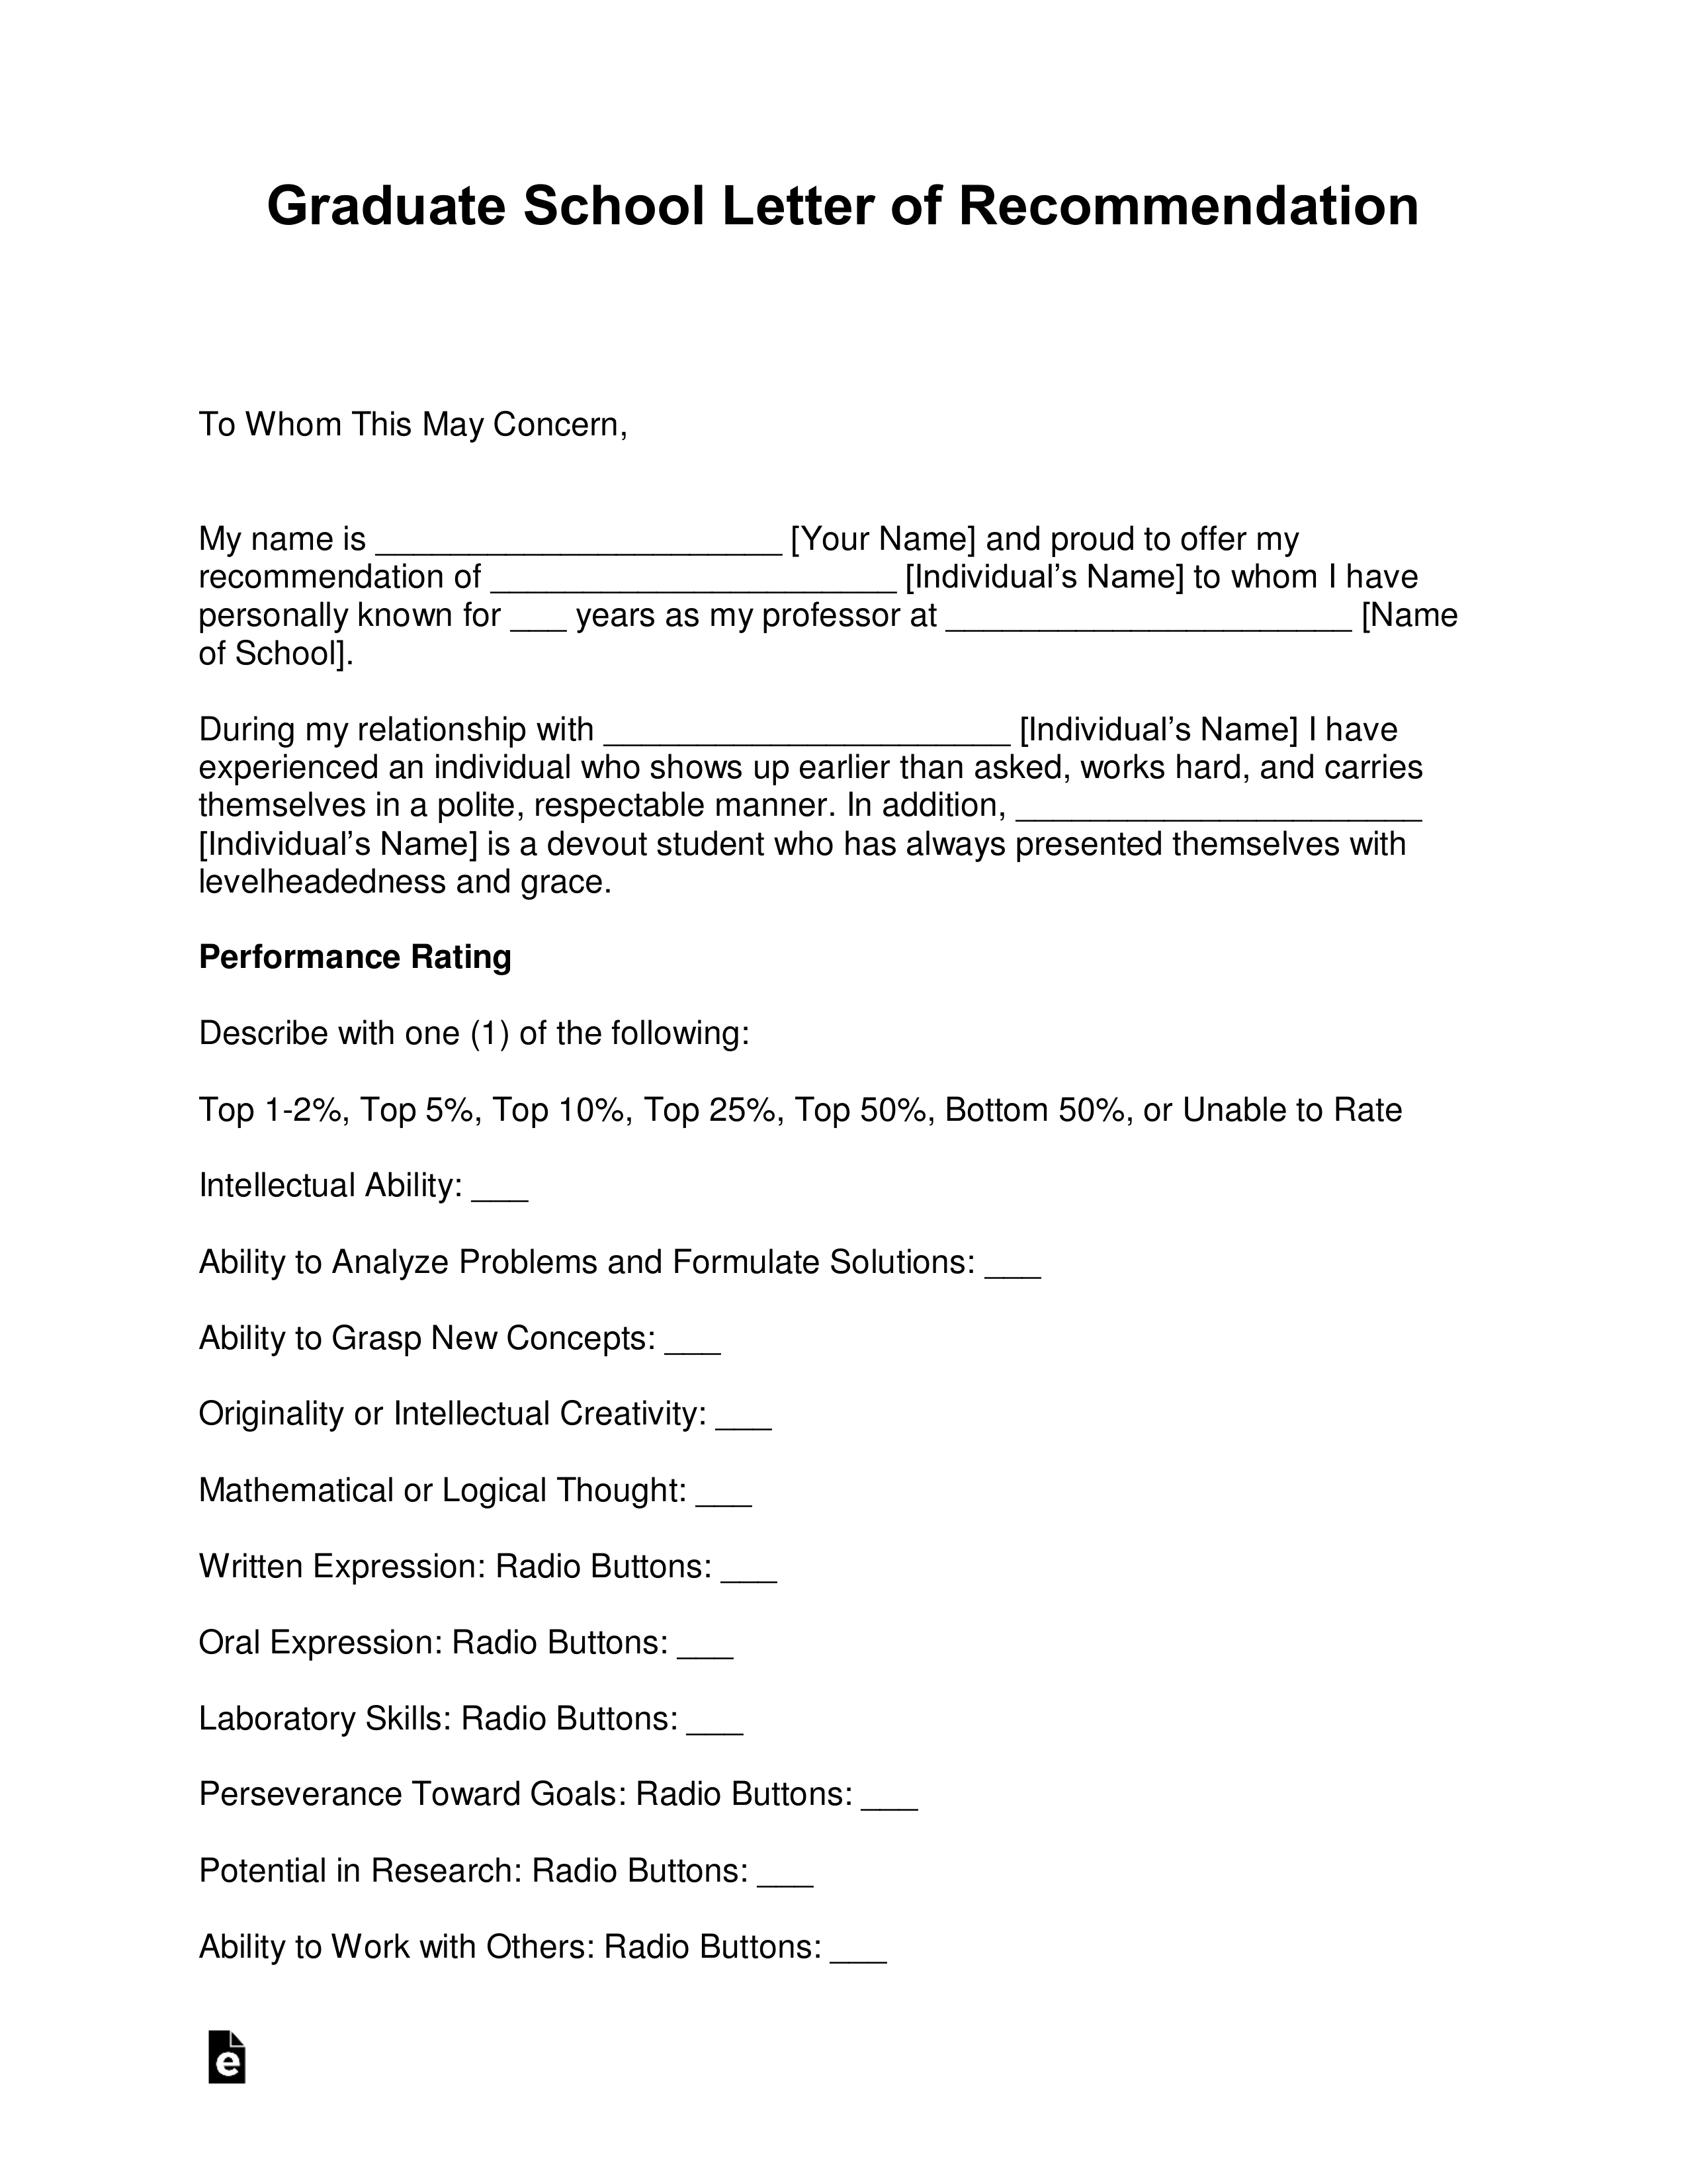 Recommendation Letter For Employee From Manager Pdf from eforms.com